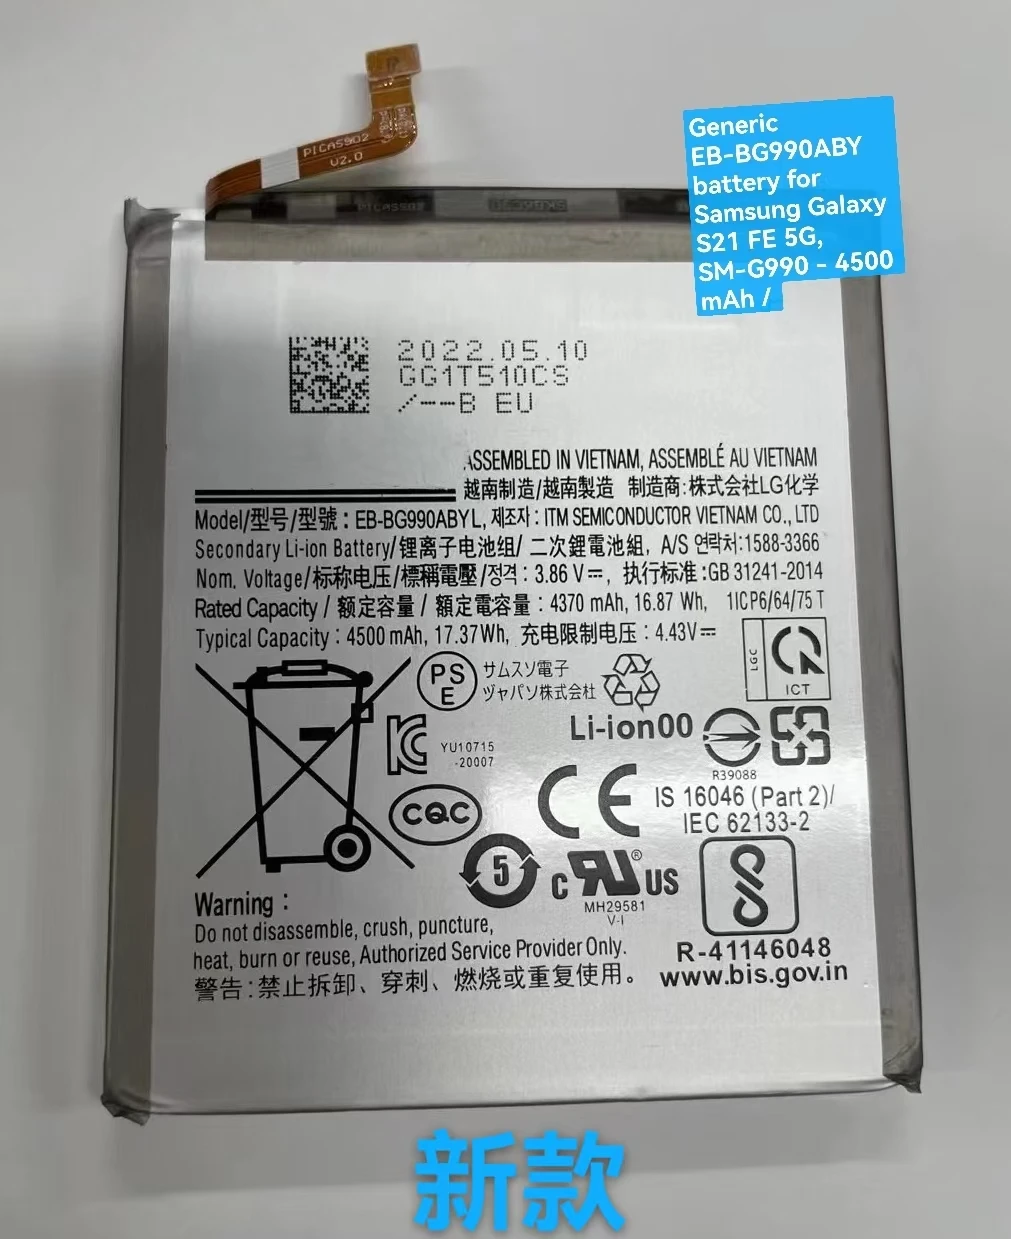 

New Battery 4500mAh EB-BG990ABY Battery For Samsung Galaxy S21 FE 5G SM-G990 Mobile Phone Batteries